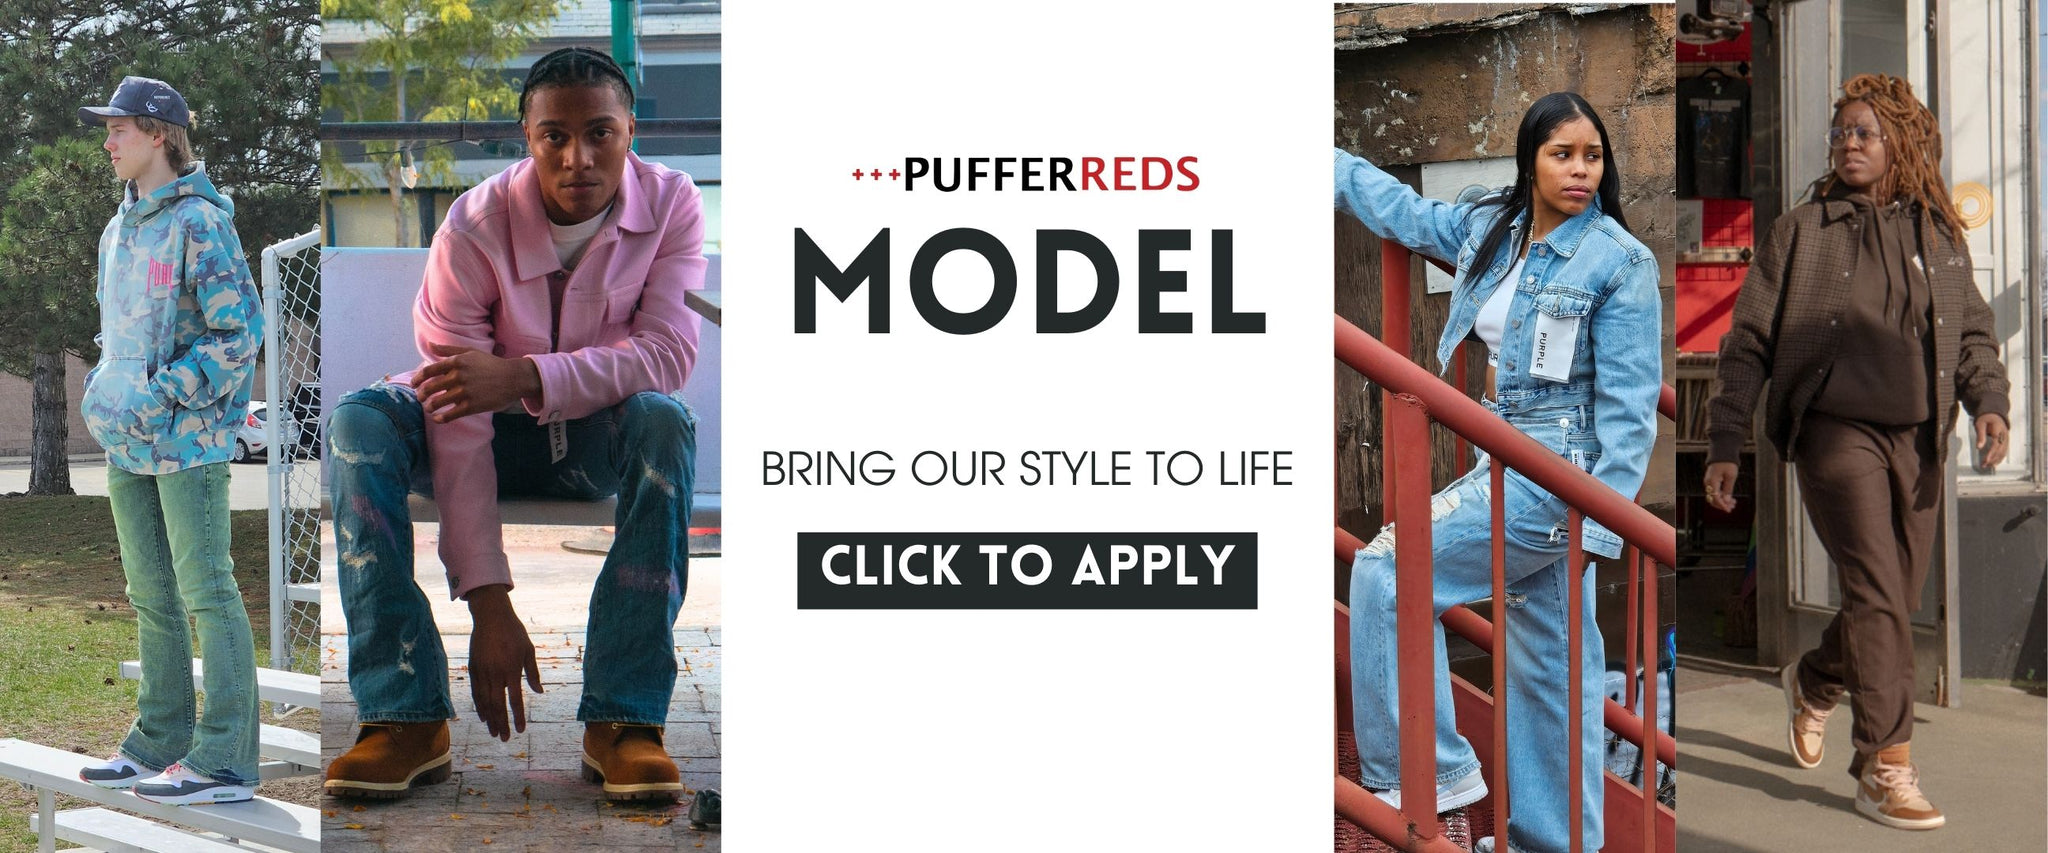 Apply Here to be a Puffer Reds Model, bring our style to life!